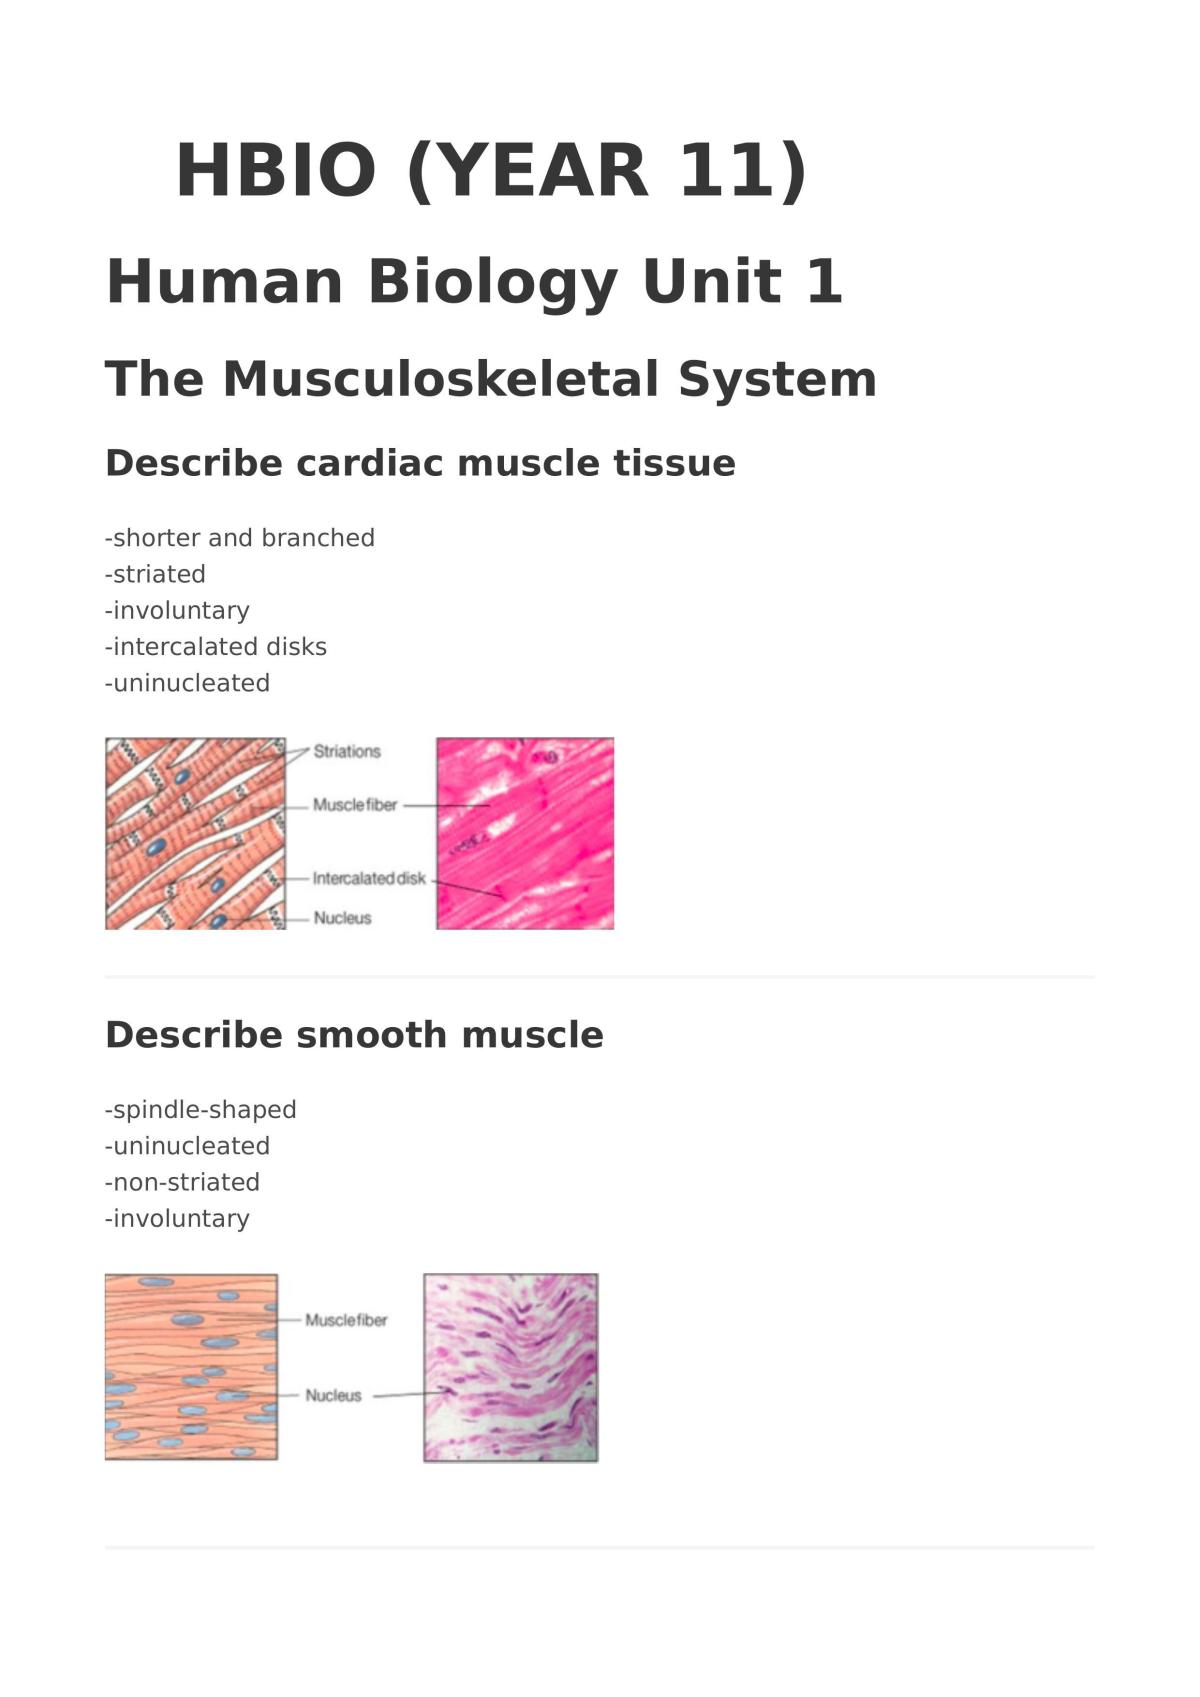 Human Biology Musculoskeletal system notes  - Page 1